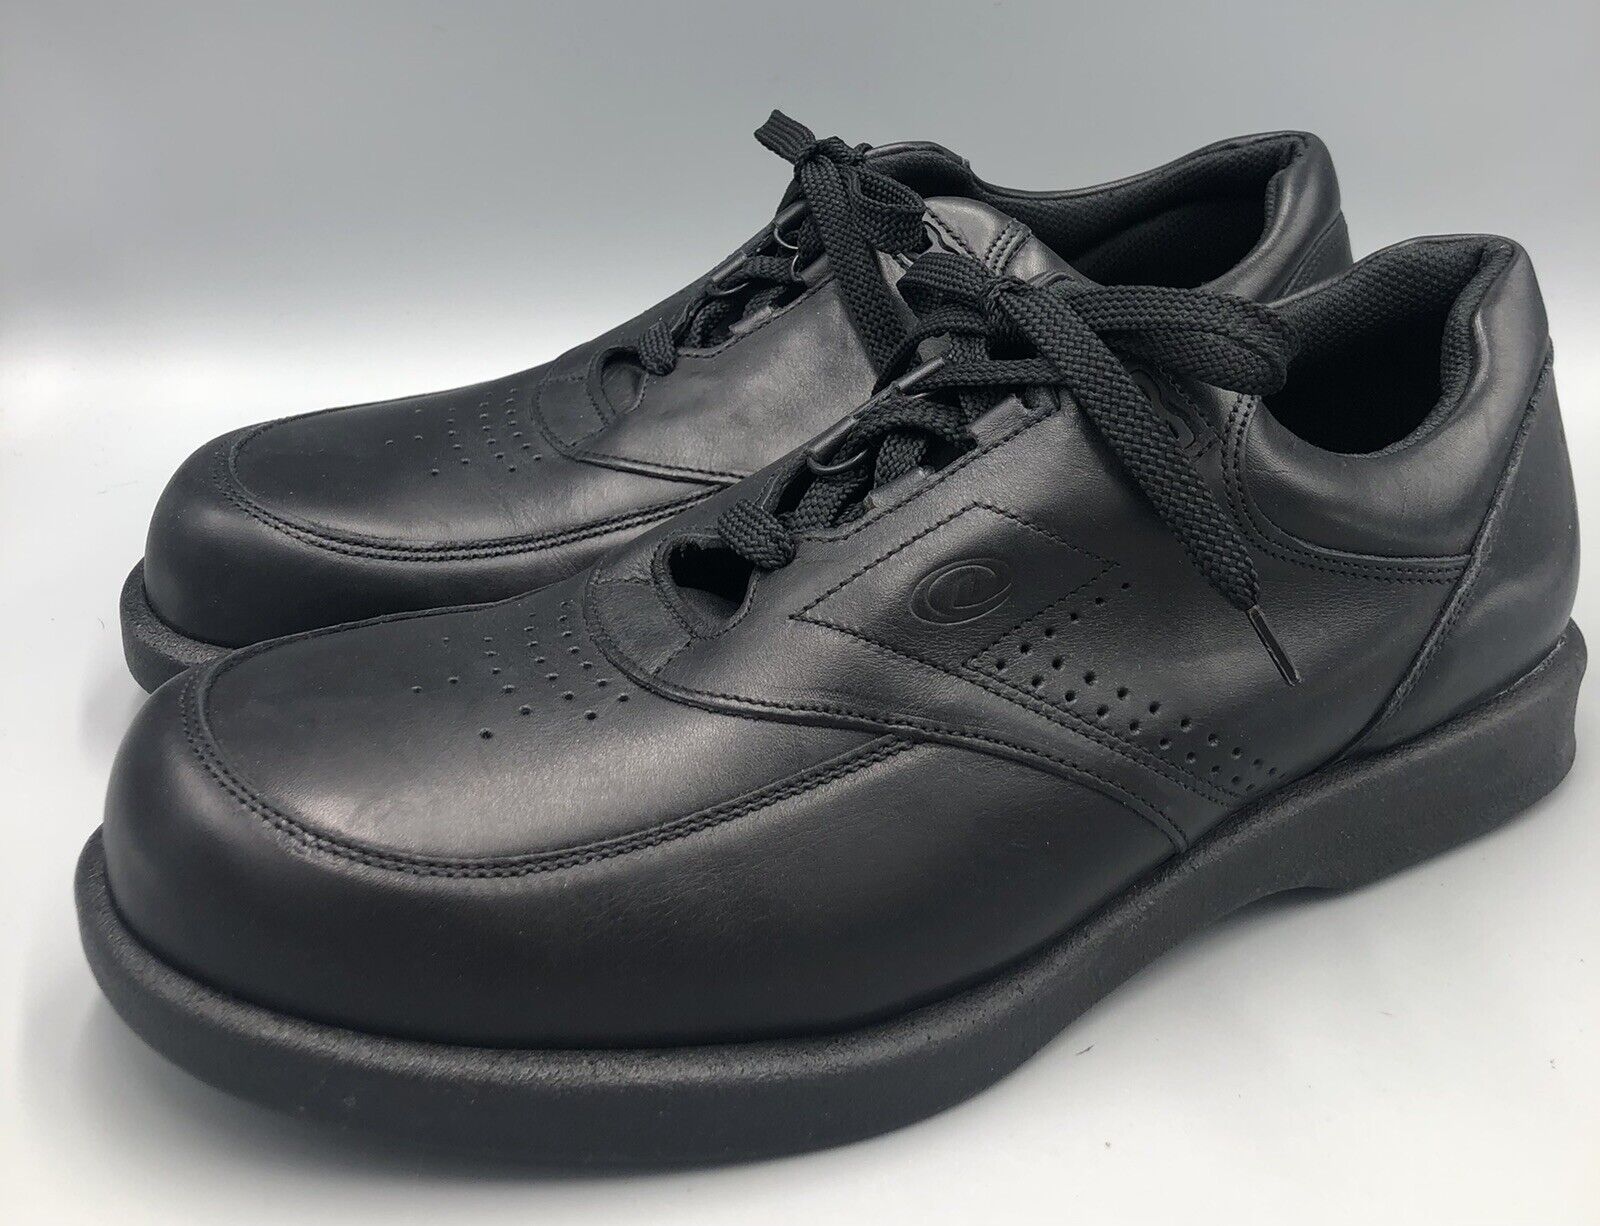 Dexter Comfort Black Leather Lace Up New products world's highest quality popular Oxfords Max 44% OFF Mens 13 Size Shoes